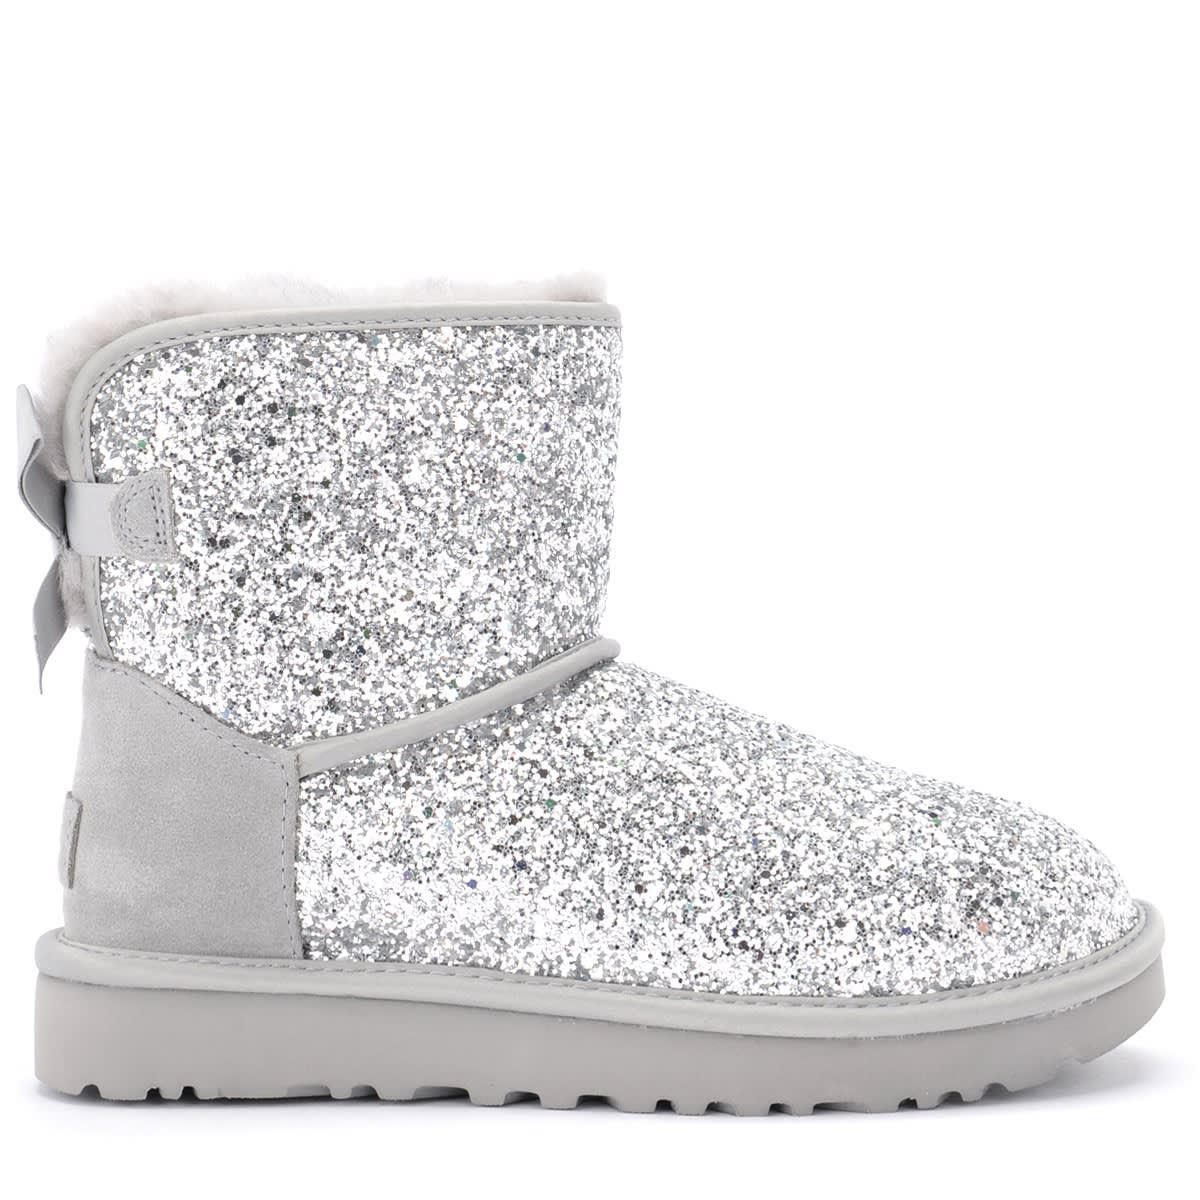 Buy Ugg Classic Mini Cosmos Ankle Boots Silver In Sheepskin With Sequins online, shop UGG shoes with free shipping